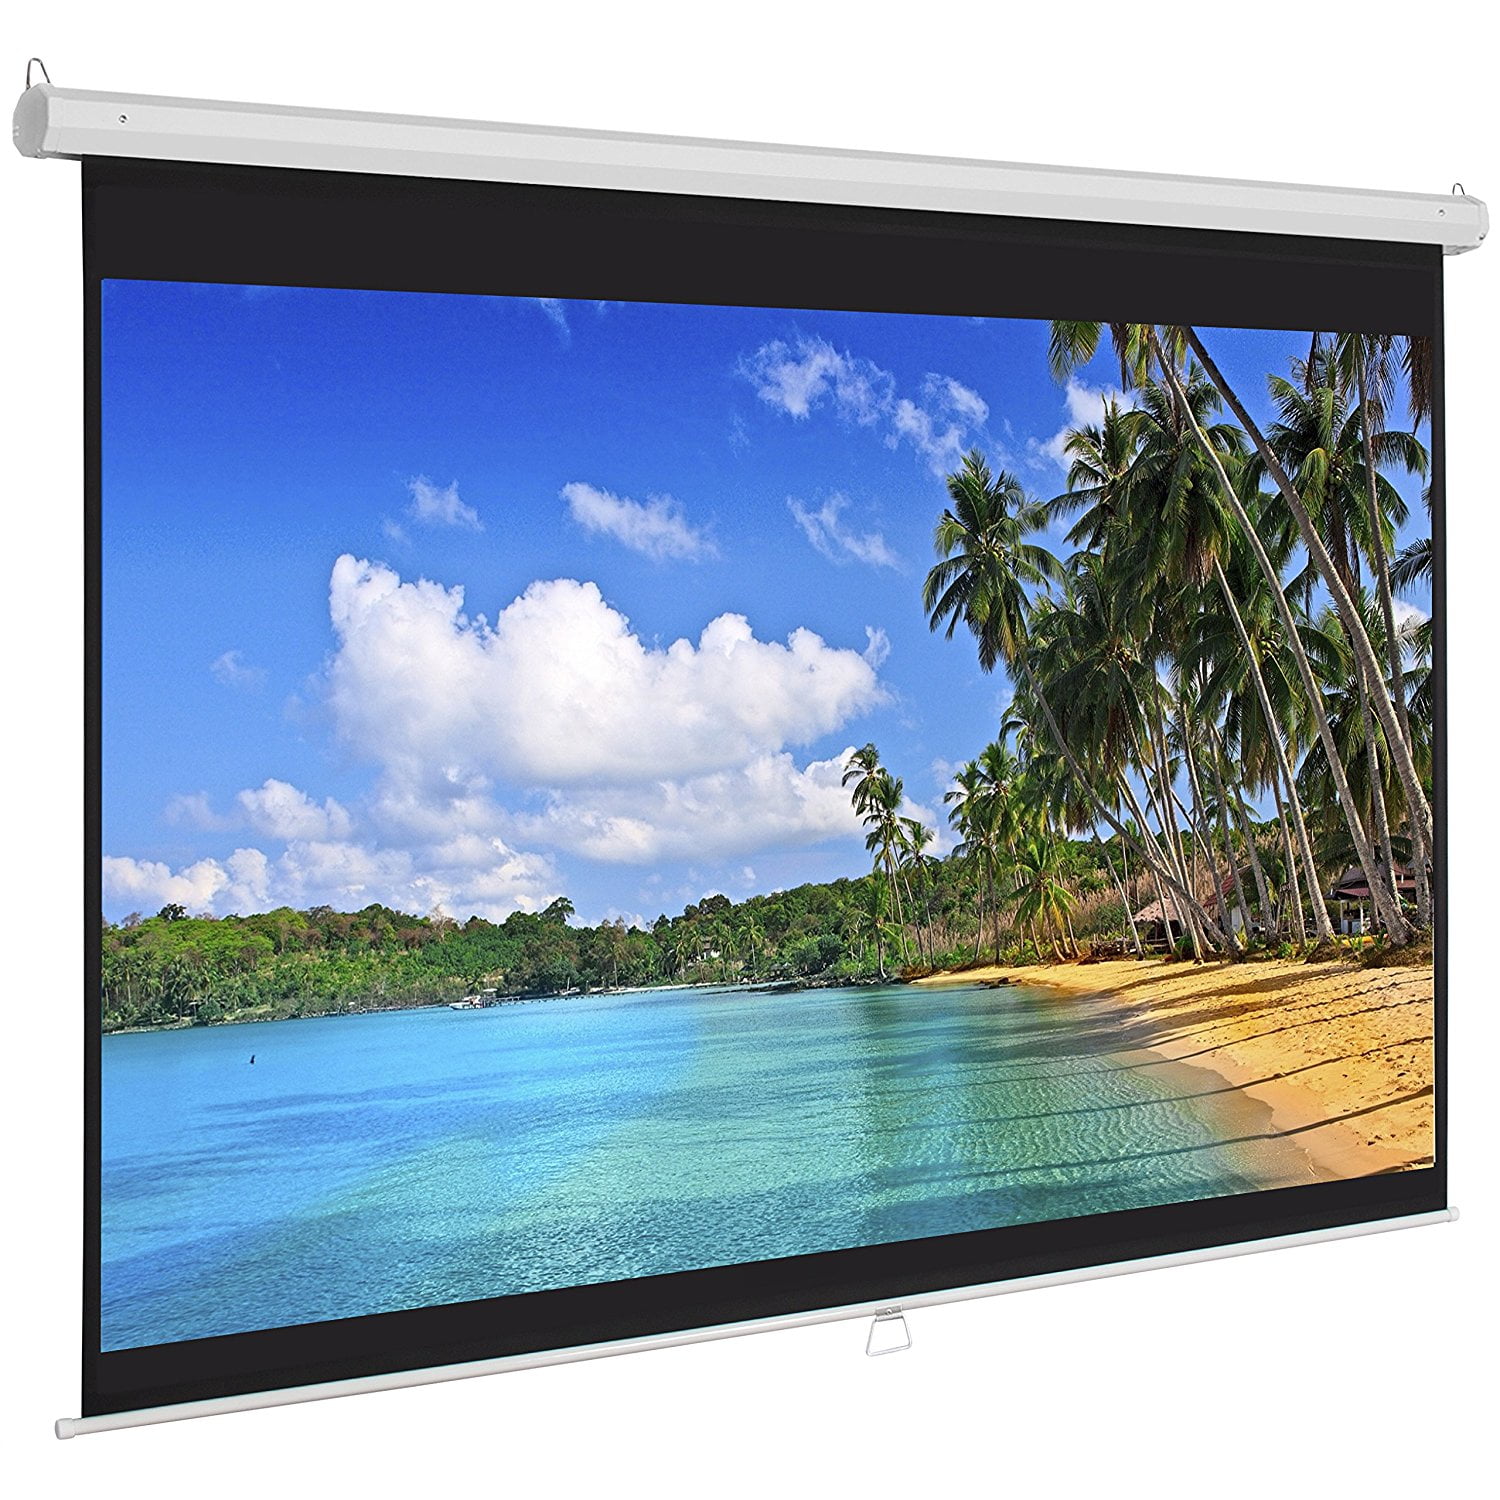 Details about   Projection Screen Matte Manual Pull Down White Home HD Movie Theater 120" 1:1 